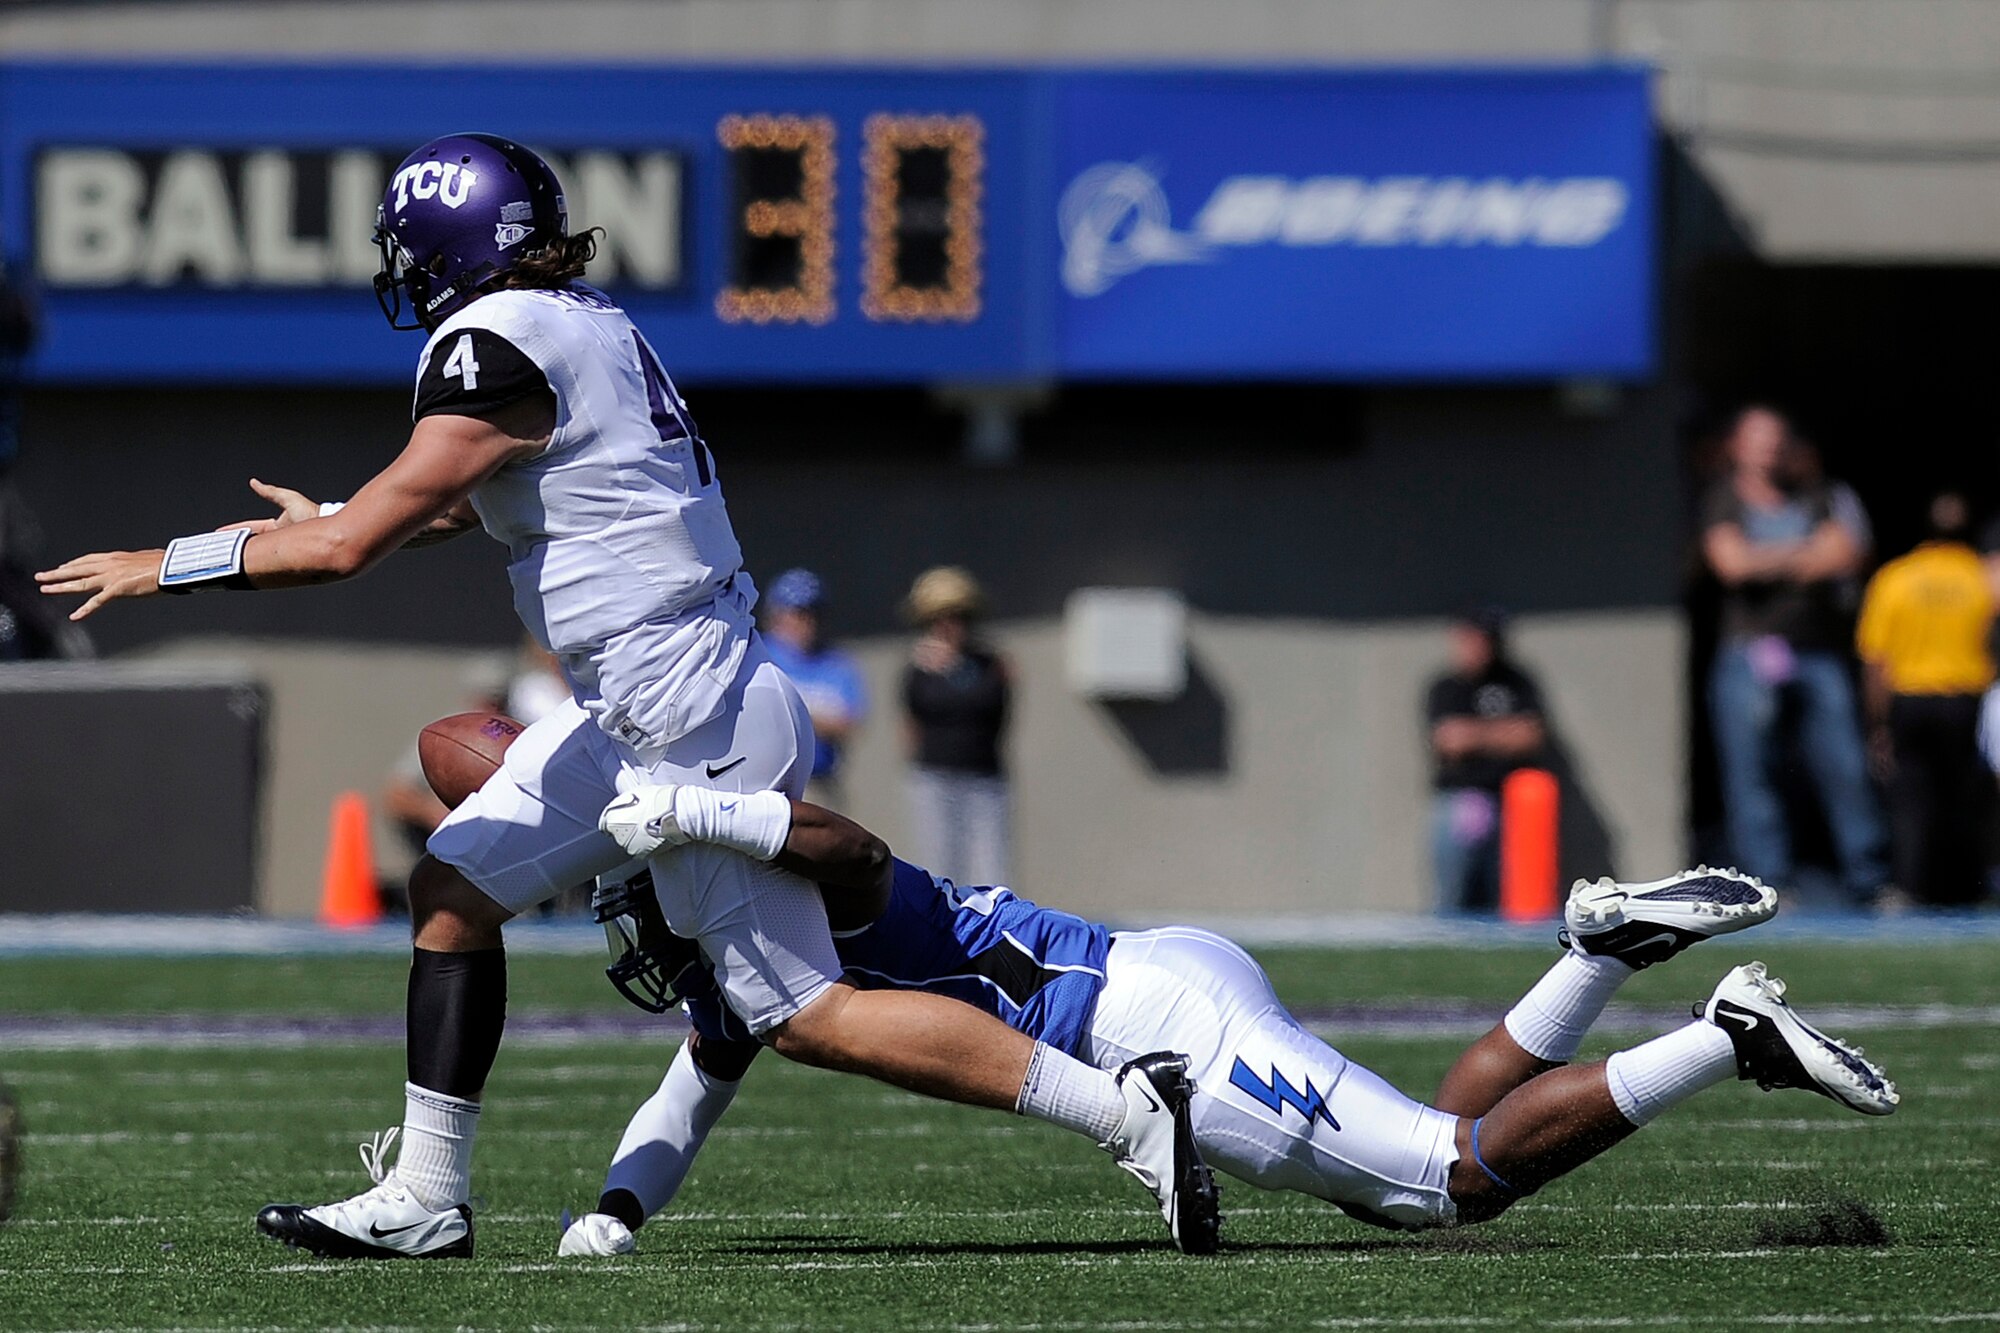 Falcon linebacker Jamil Cooks forces a fumble during a losing effort to the TCU Horned Frogs Sept. 10, 2011 at Falcon Stadium. The Frogs gained more than 400 total yards in what was almost a replay of last year's game in Fort Worth, Texas, and defeated the Falcons, 35-19. (U.S. Air Force photo/Mike Kaplan)